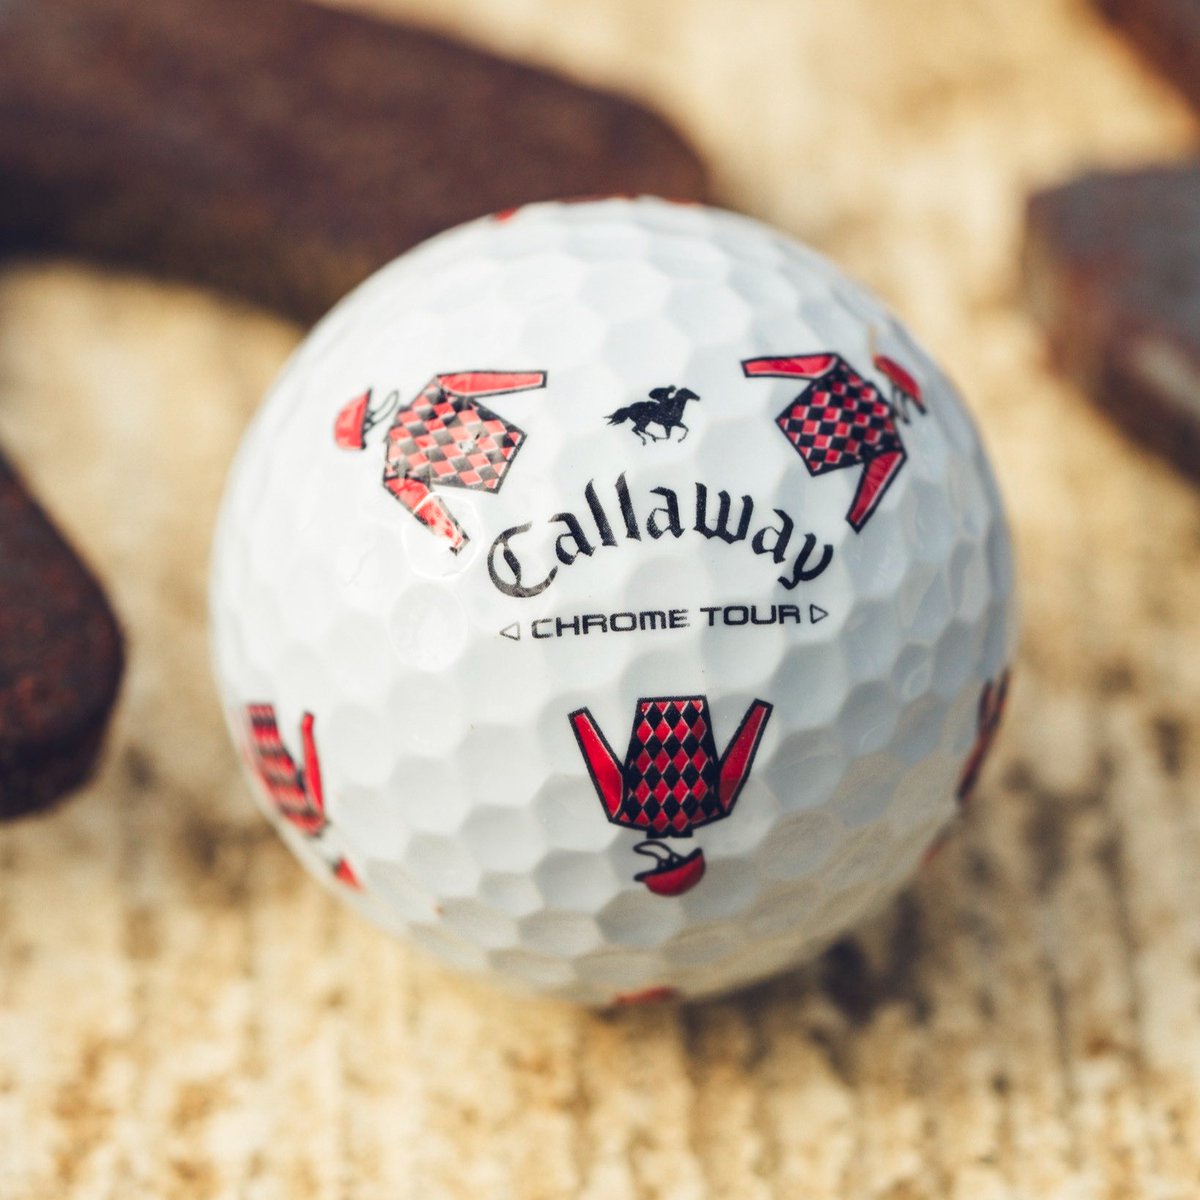 The Limited Edition Callaway “Day at the Races” Chrome Tour golf balls feature a colourful design inspired by traditional jockey silk patterns and styles. 🐴⛳️ Shop now: bit.ly/4bjvQQX